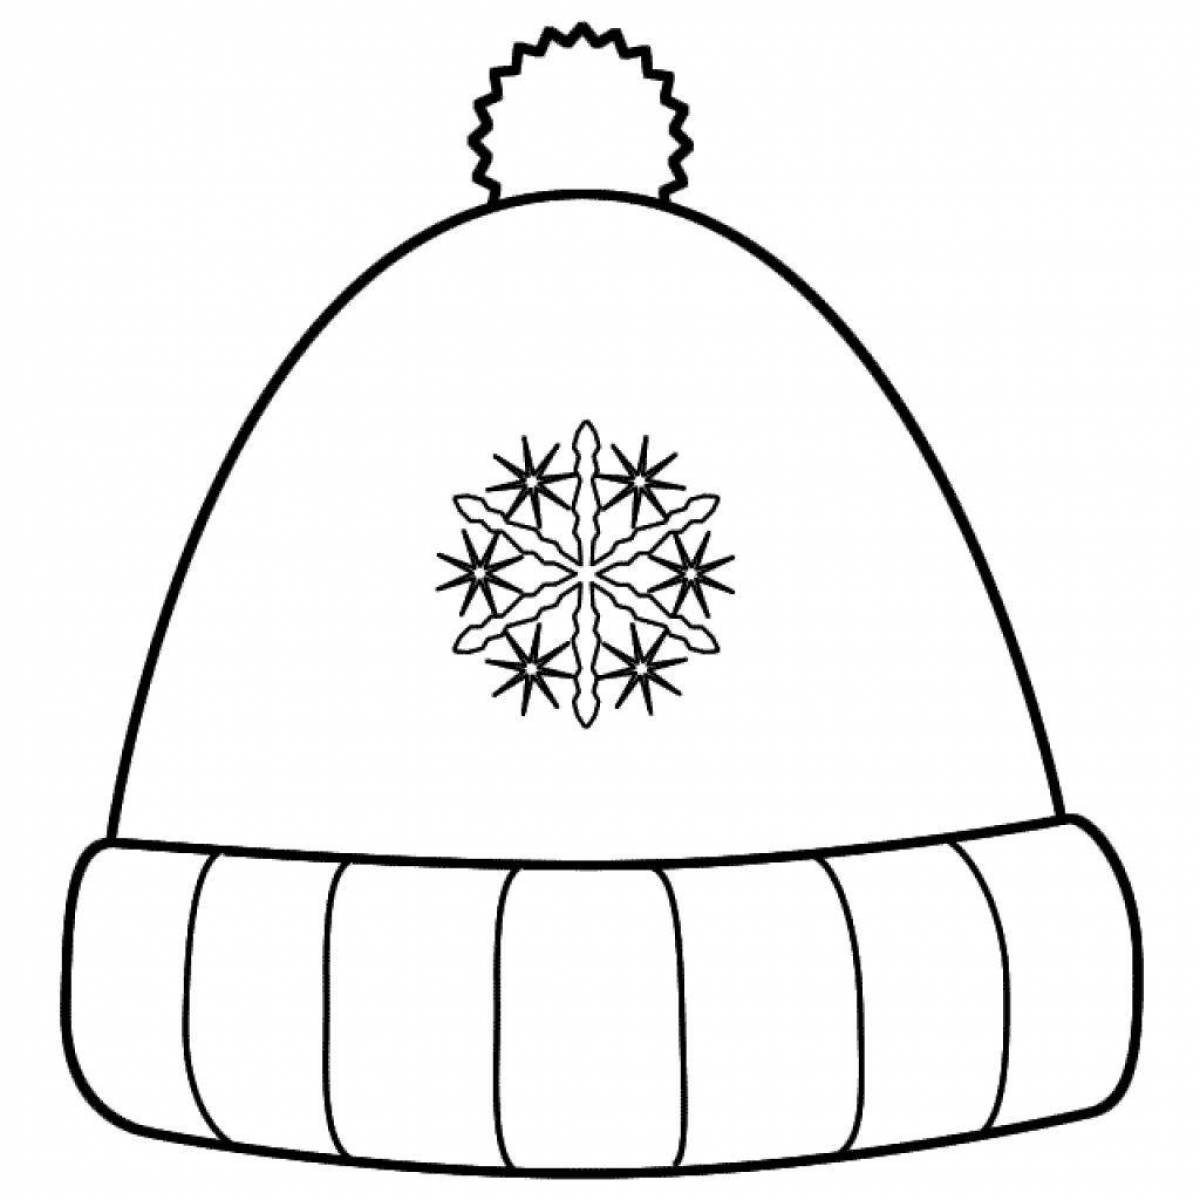 Coloring book shining baby hat